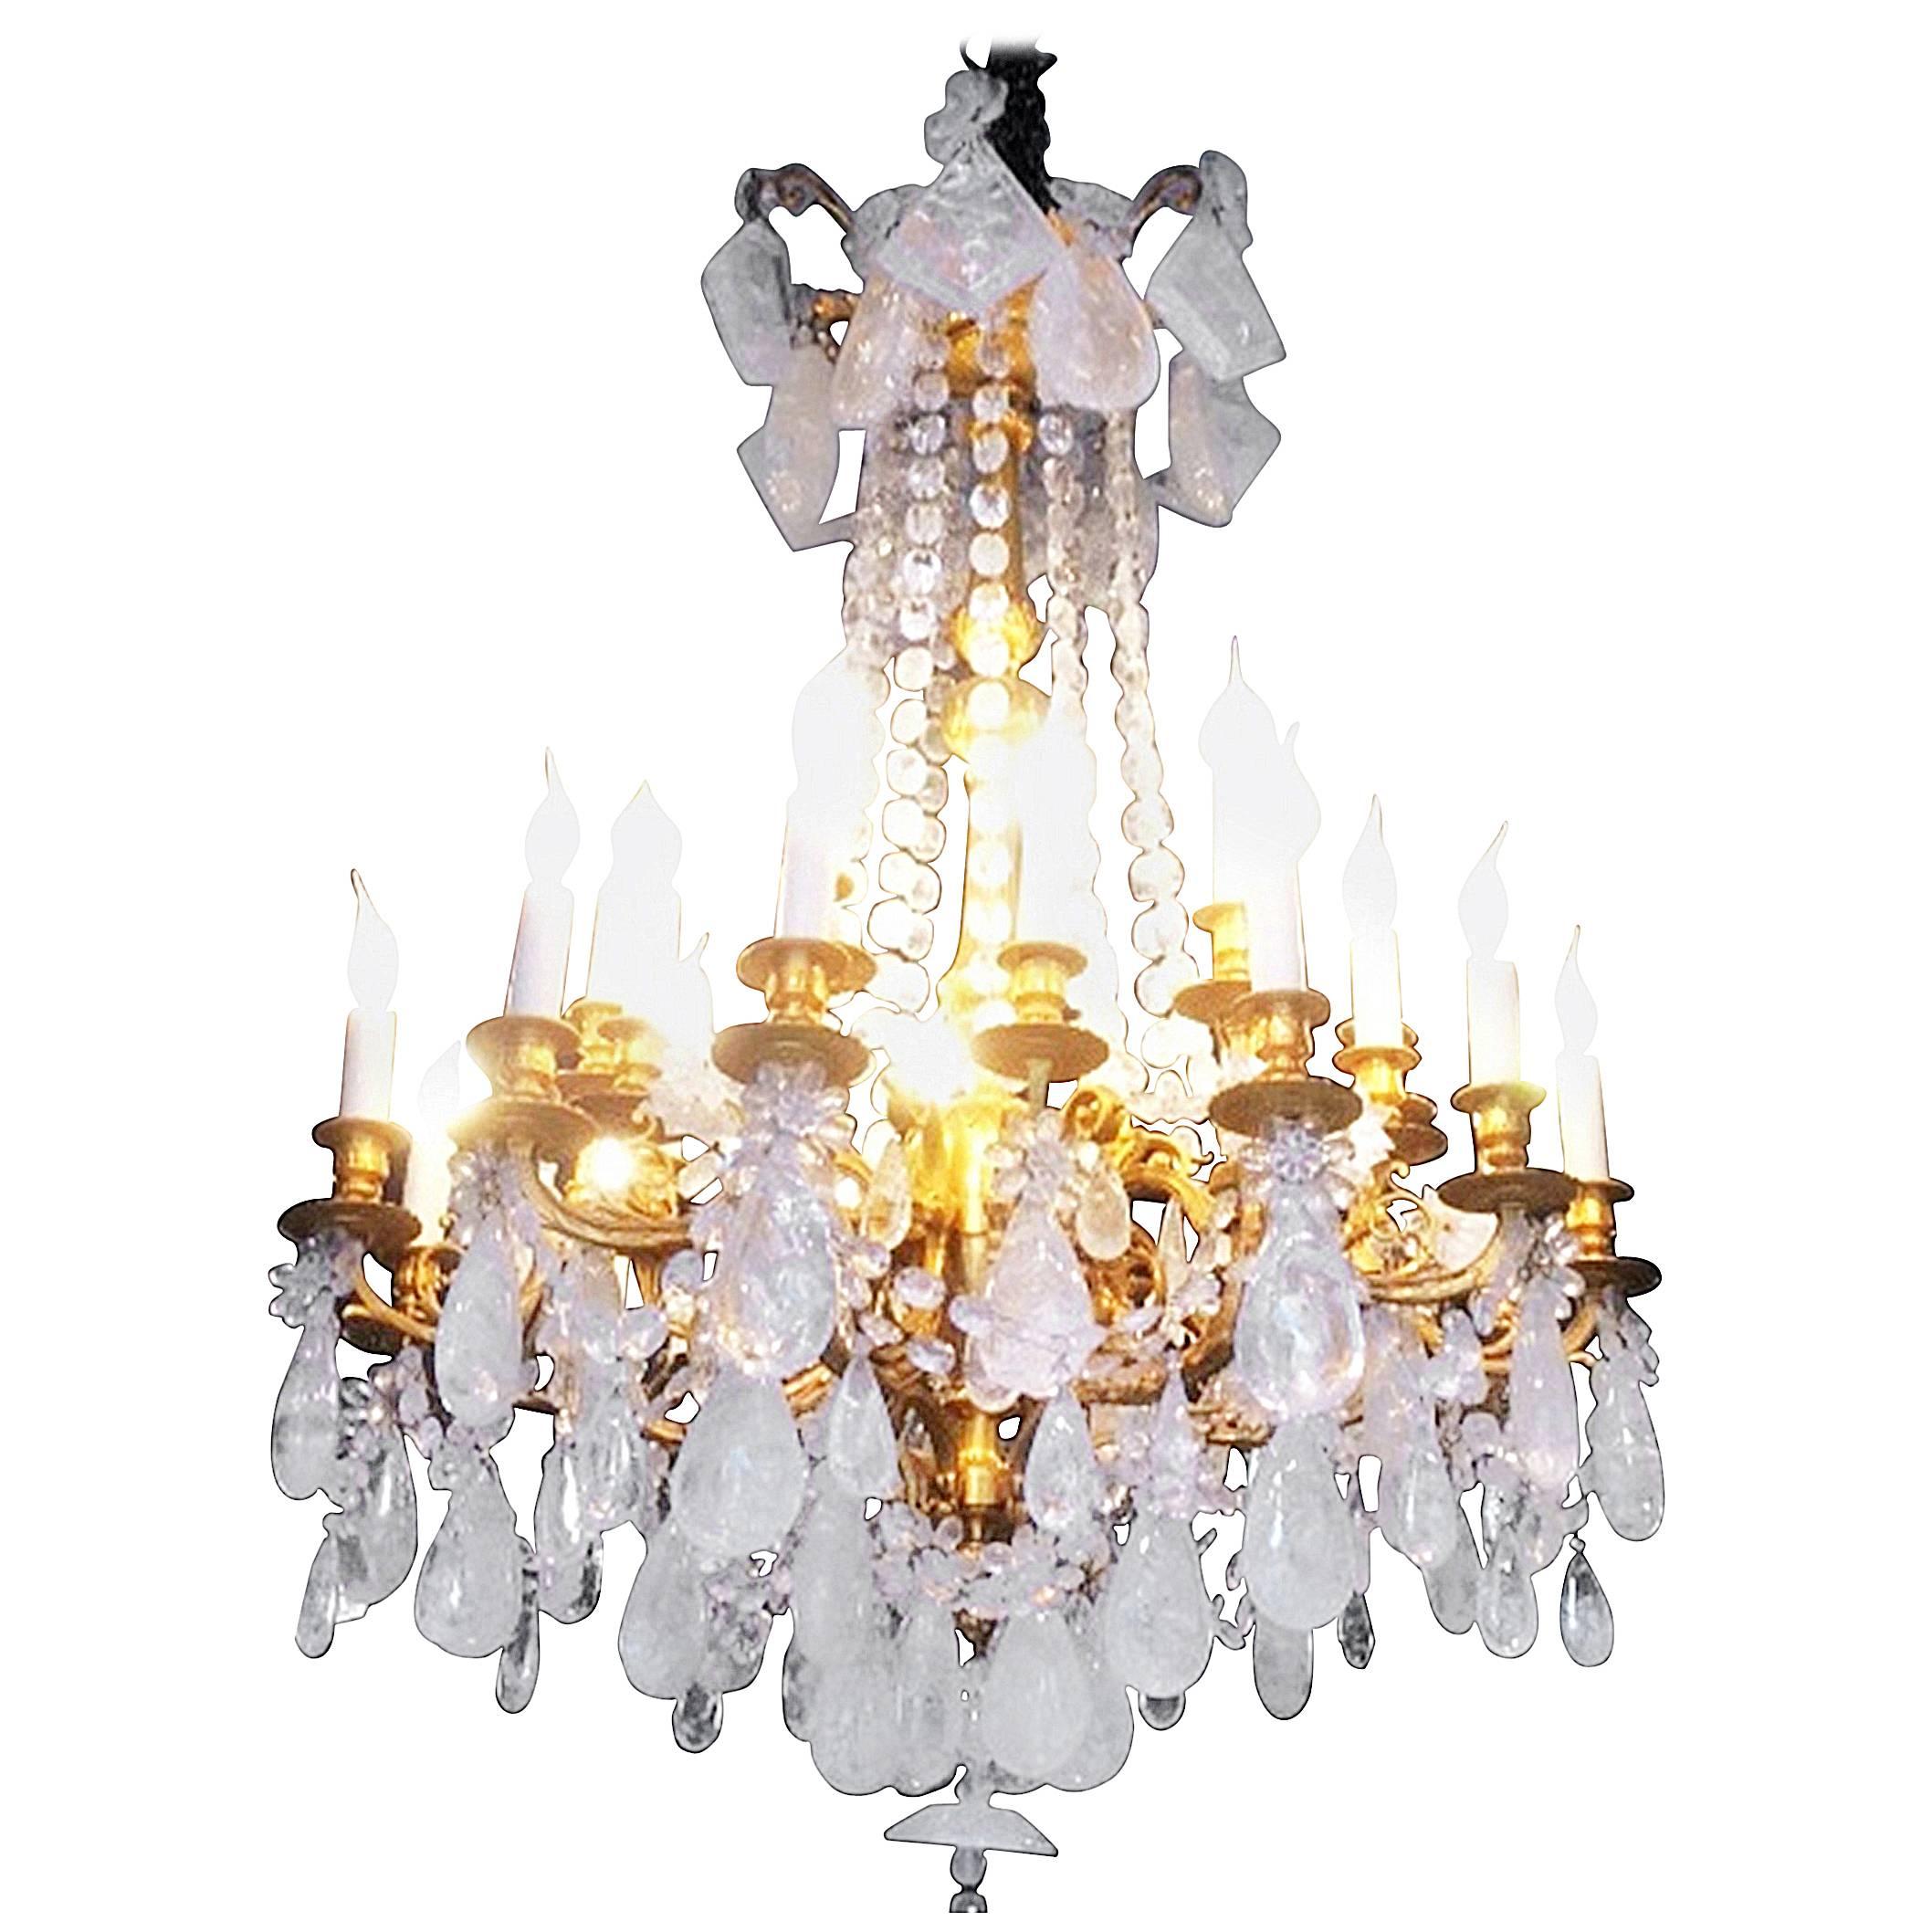 Fabulous Rock Crystal and Chiseled Gilt Bronze Chandelier, Lousi XVI Style, 2016 For Sale